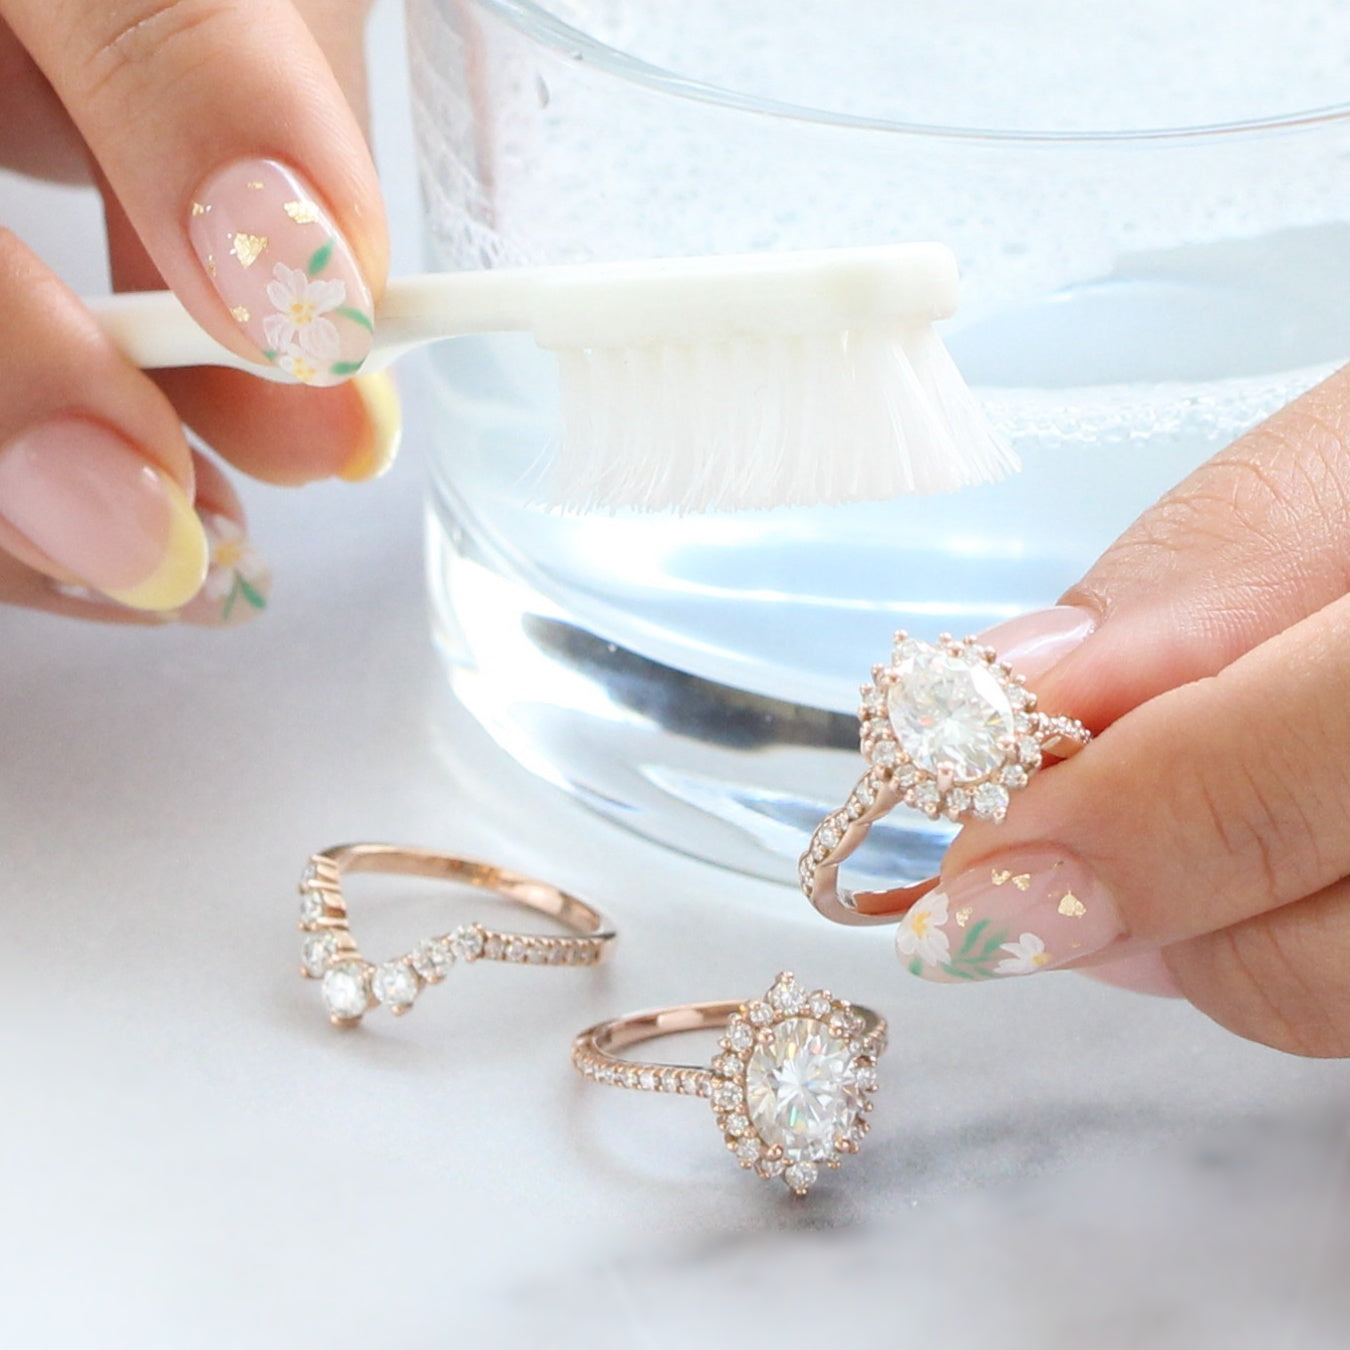 How to Clean Ring Jewelry at Home, Ring Cleaning Tips, Jewelry Care